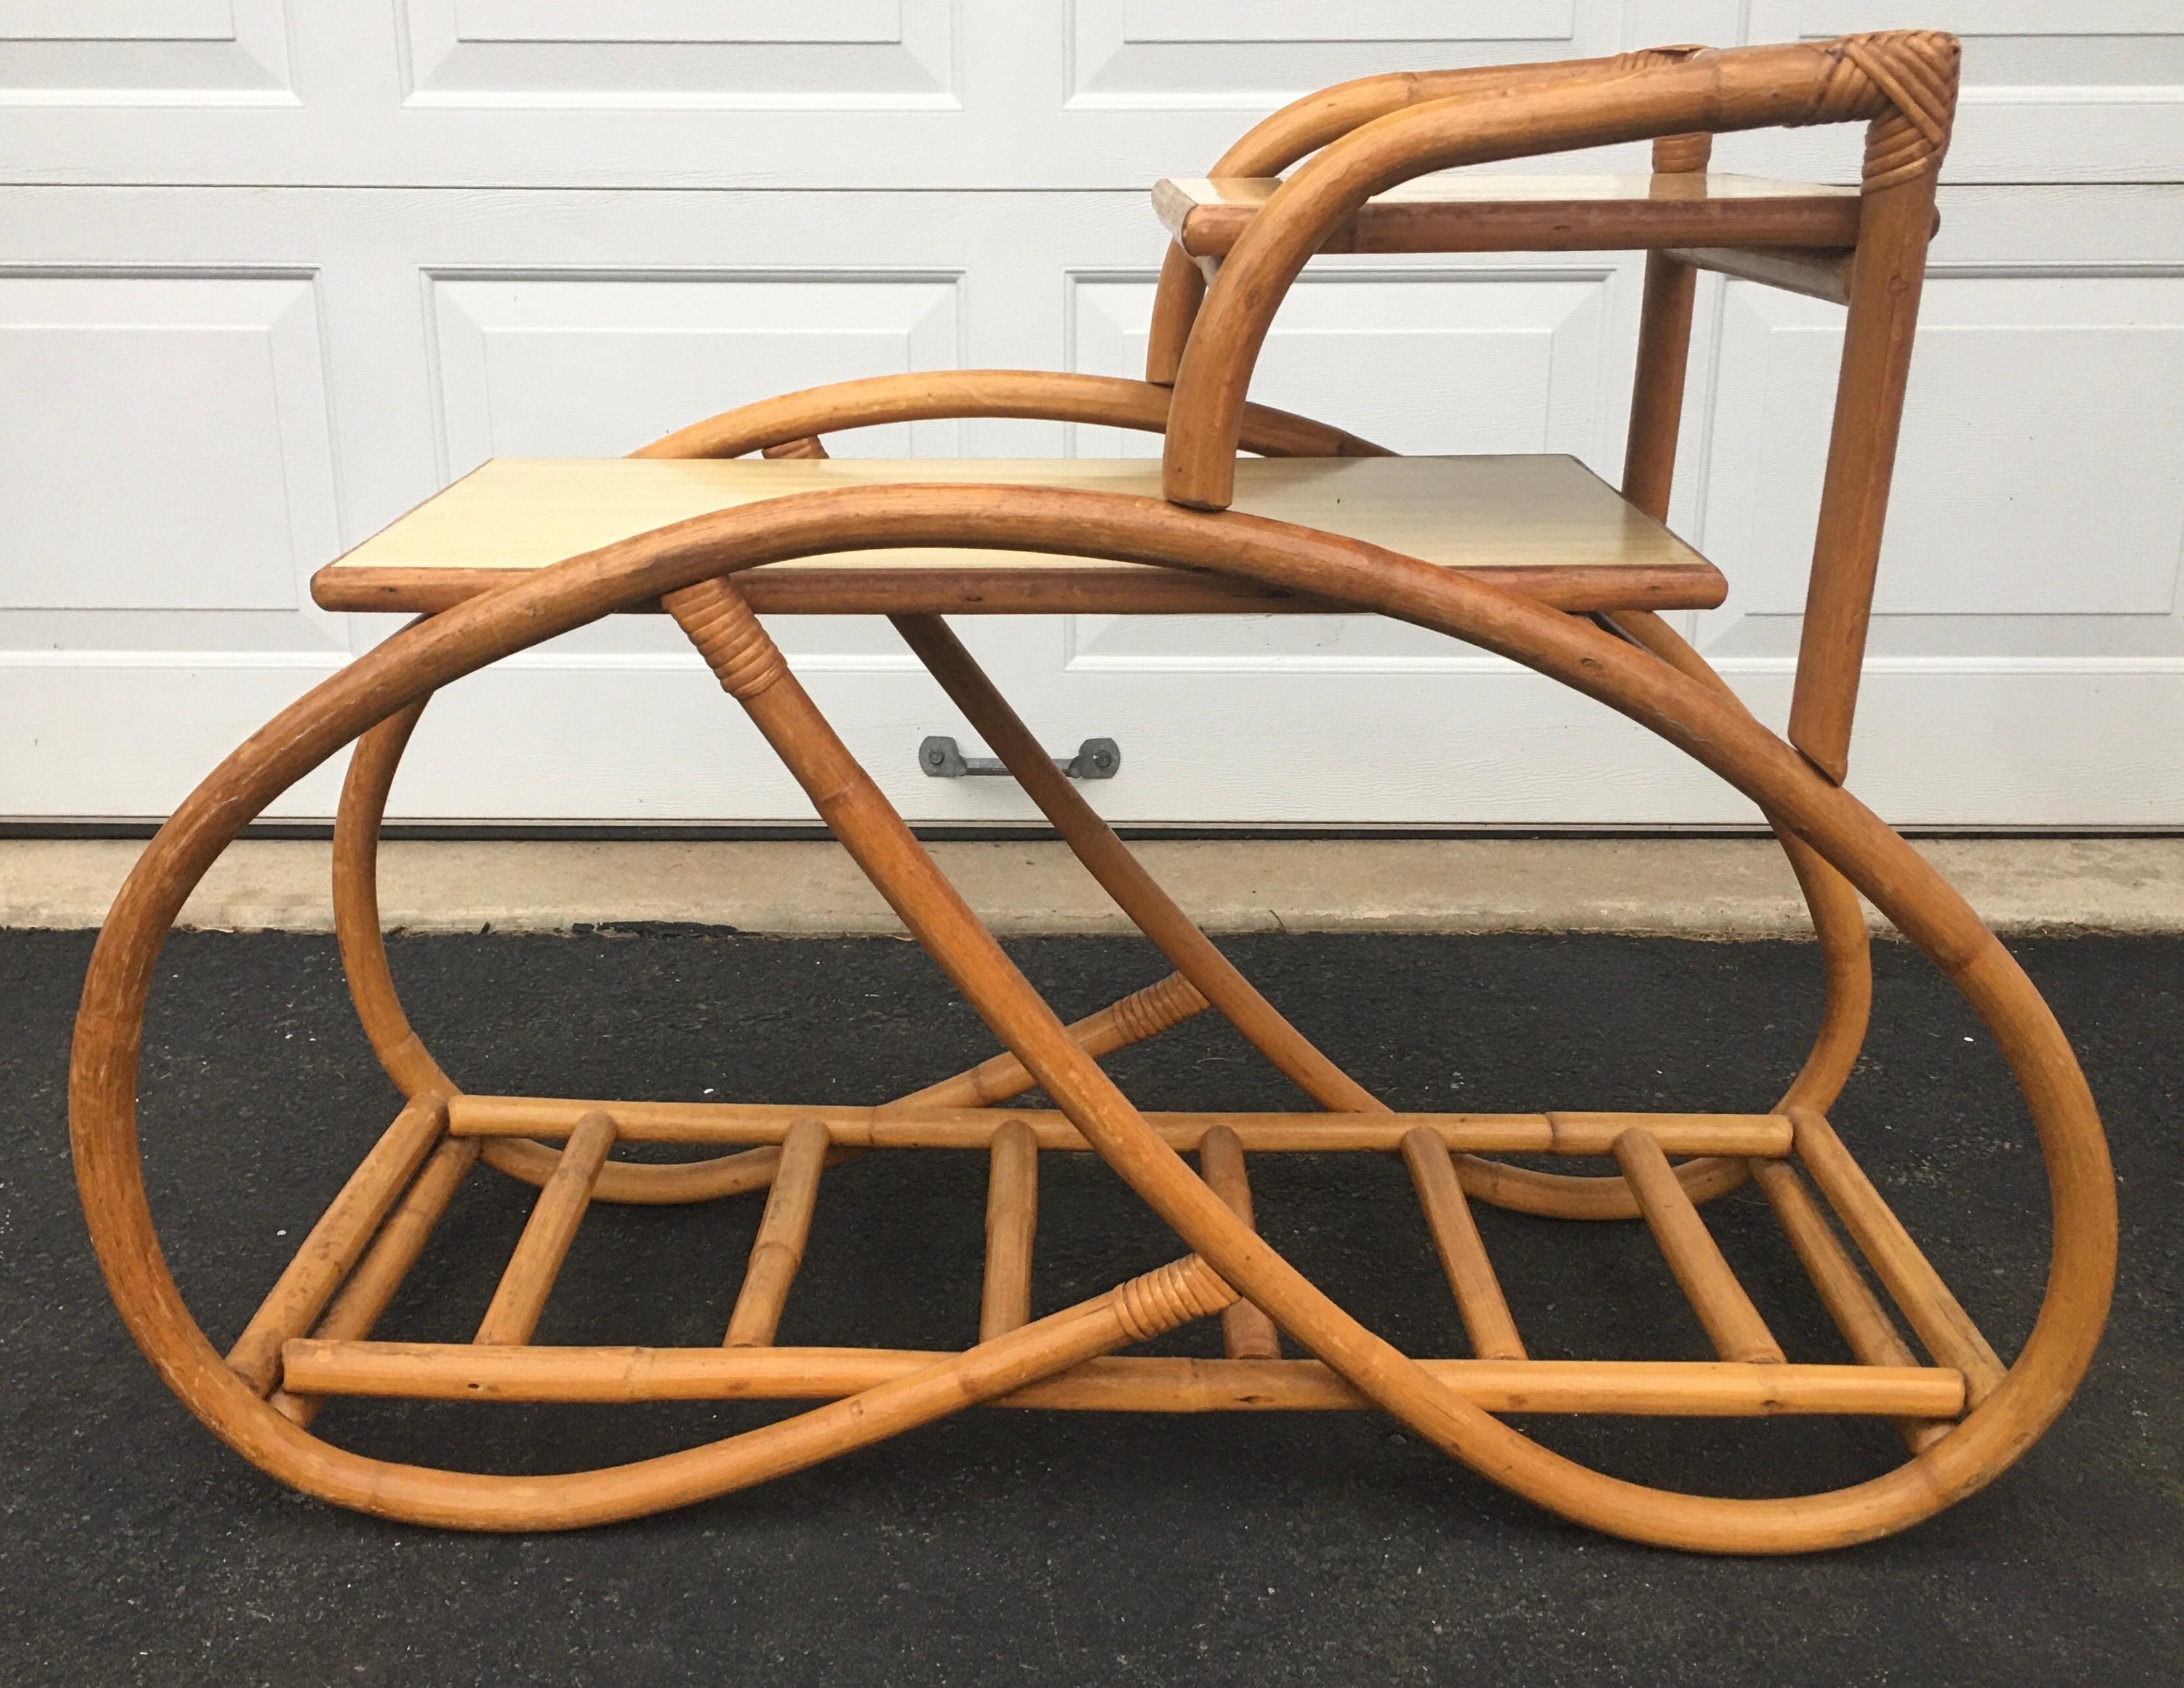 Three quarter pretzel rattan side table in original vintage condition. Features amazing organic and sculptural bentwood bamboo wood frame. Features three tiers, top two table tiers are hardwood tops covered in original blonde laminate. Bottom tier